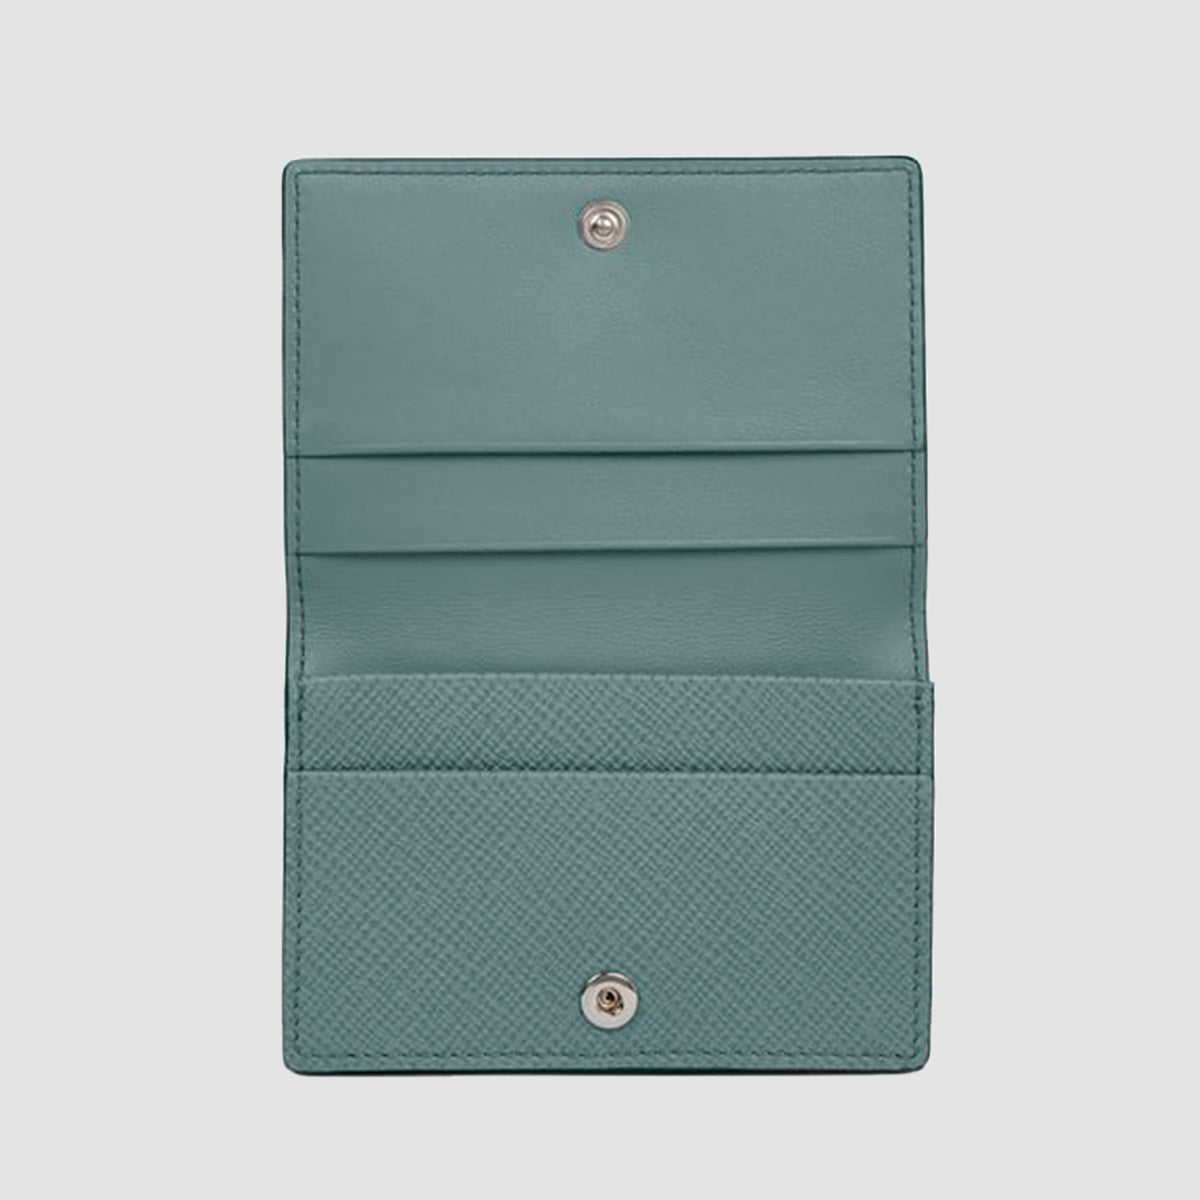 Folded Card Case with Snap Closure in Panama - Dark Teal